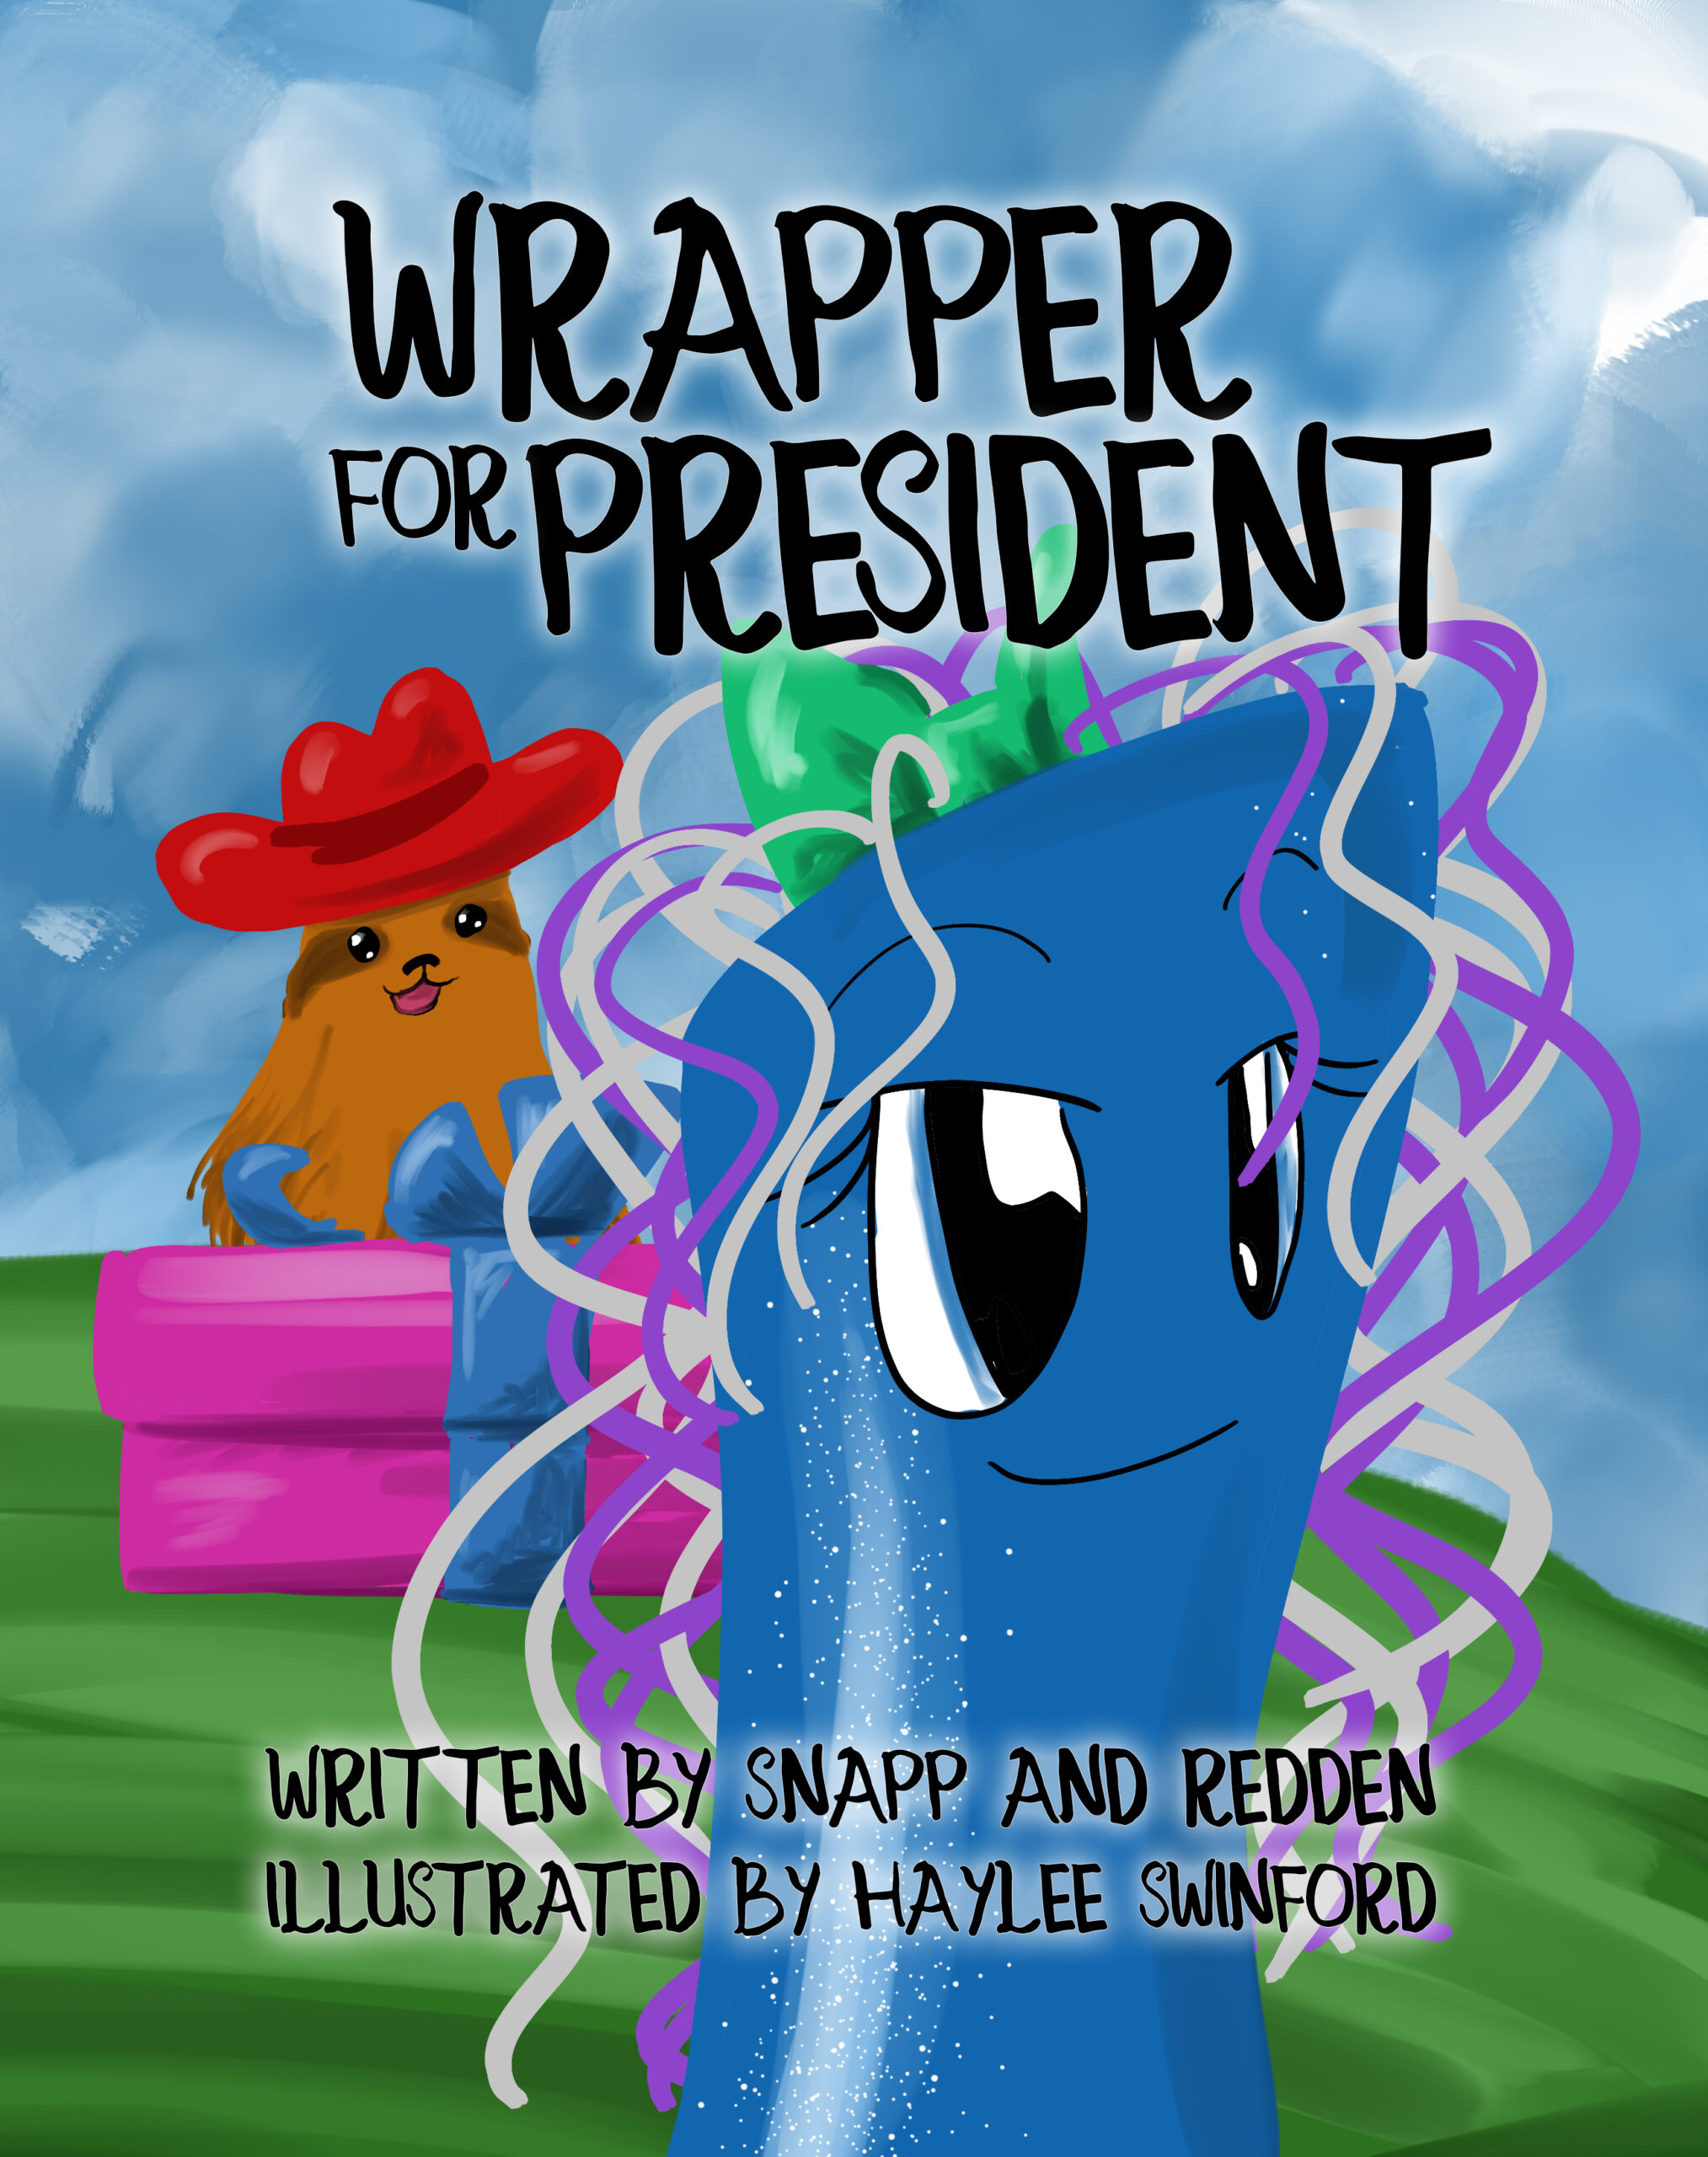 DreamLoud kid's book - Wrapper for President